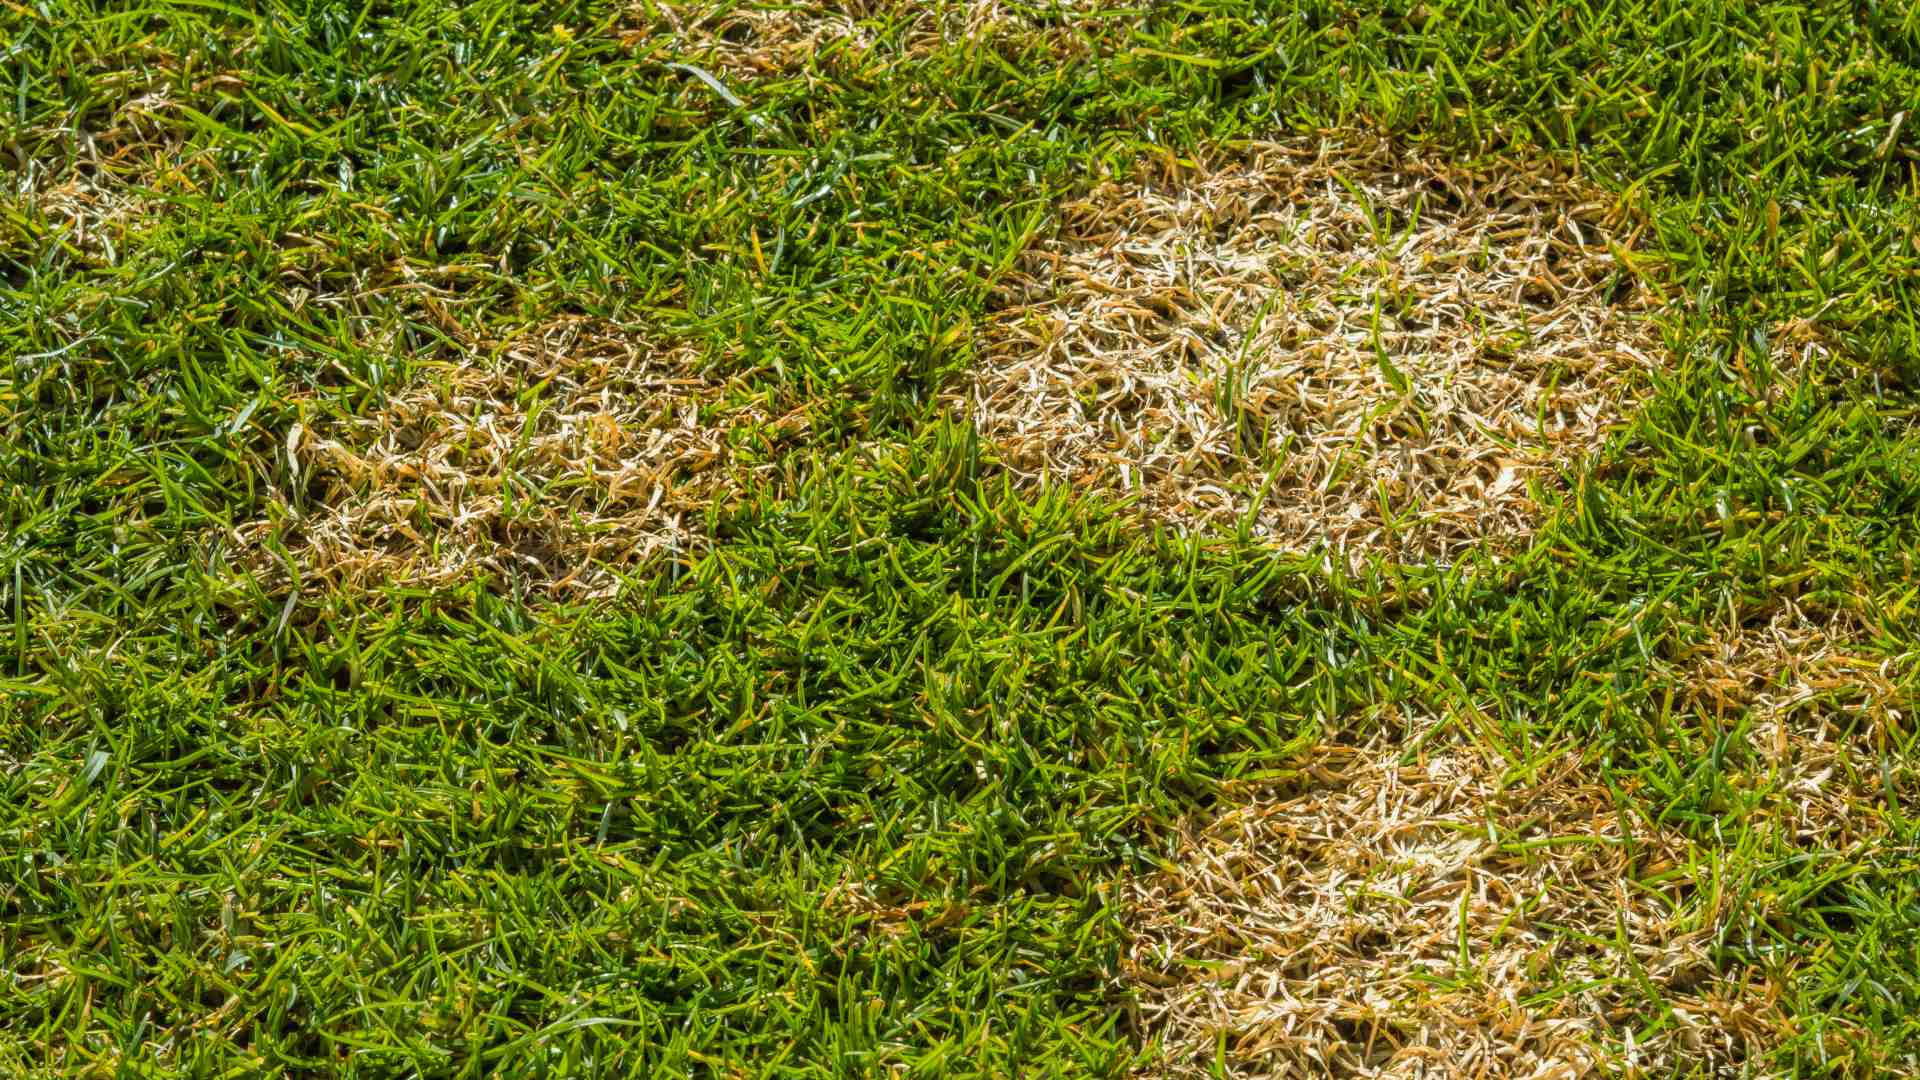 Lawn Disease 101: Tips for Preventing & Curing Spring Dead Spot